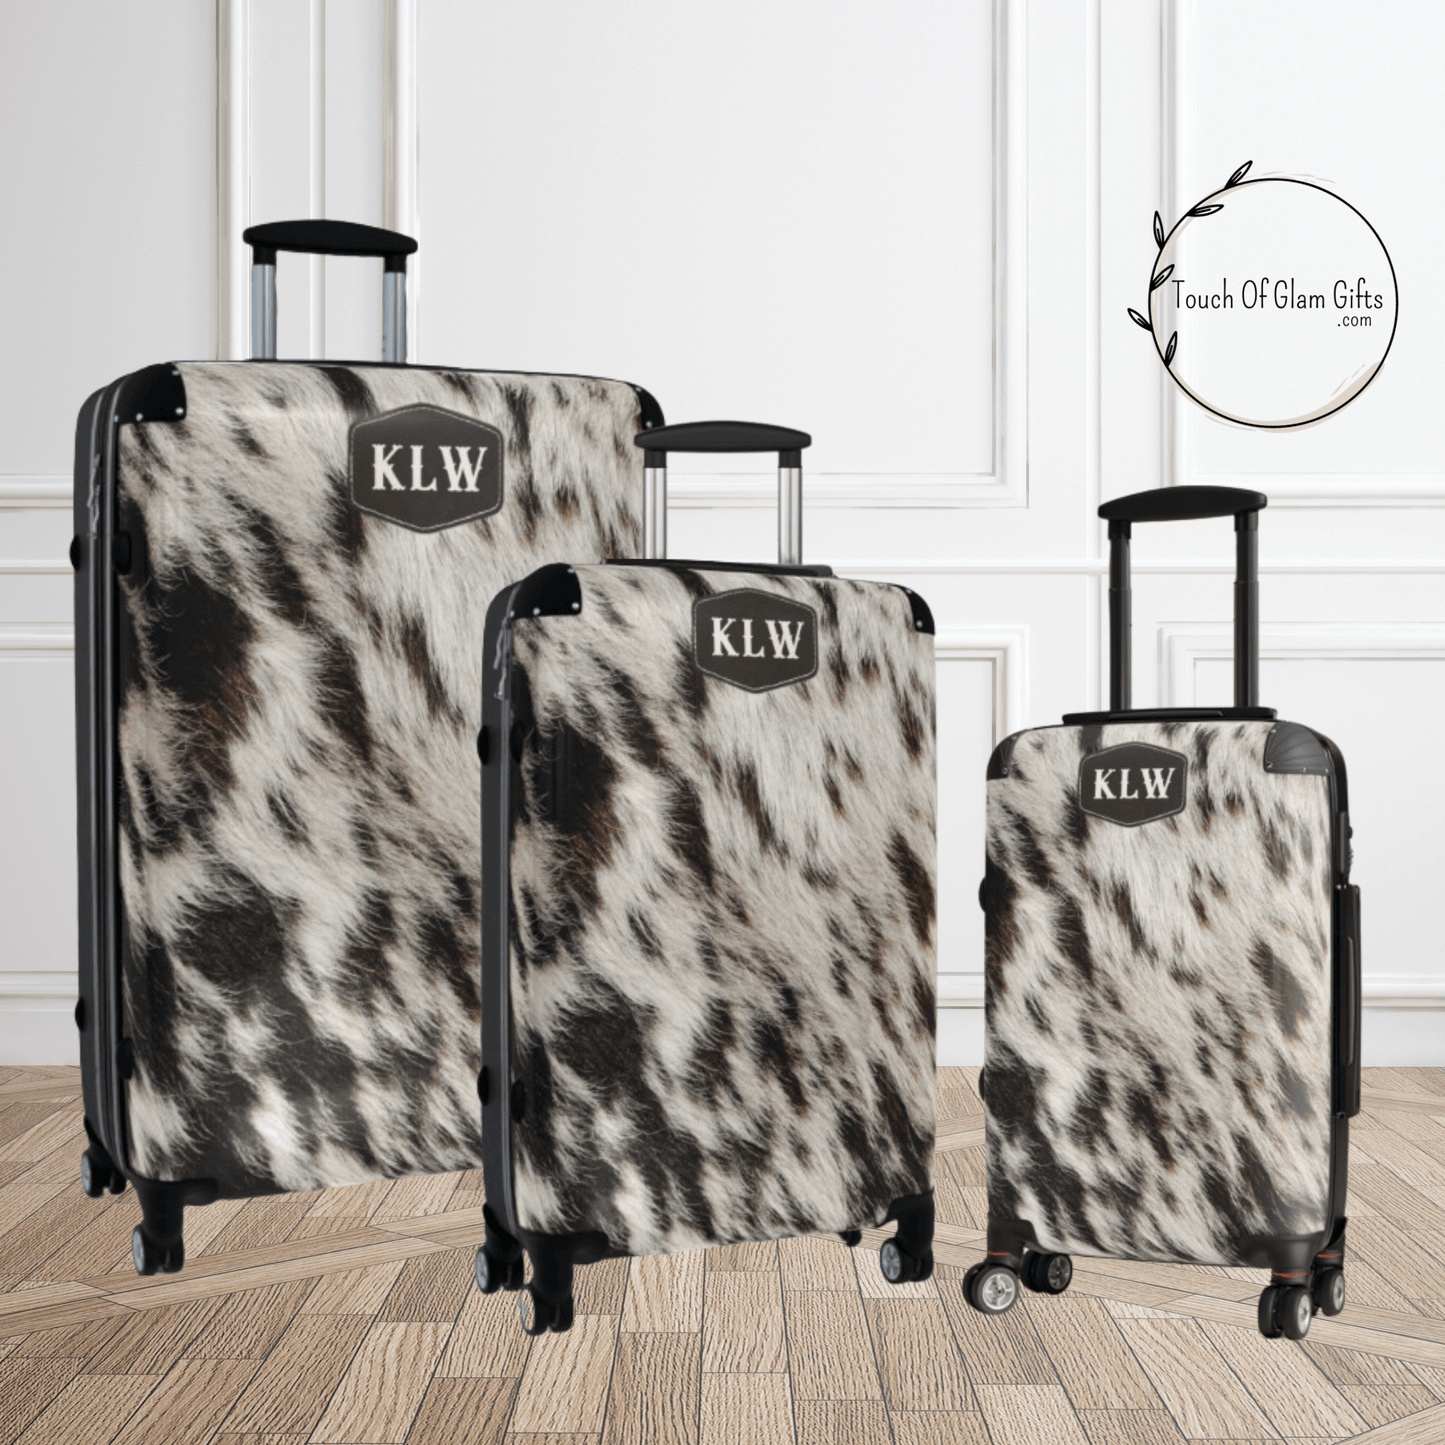 Personalized Cowhide Luggage Set #2, Cow Print Hard Shell Suitcases, Western Style Luggage